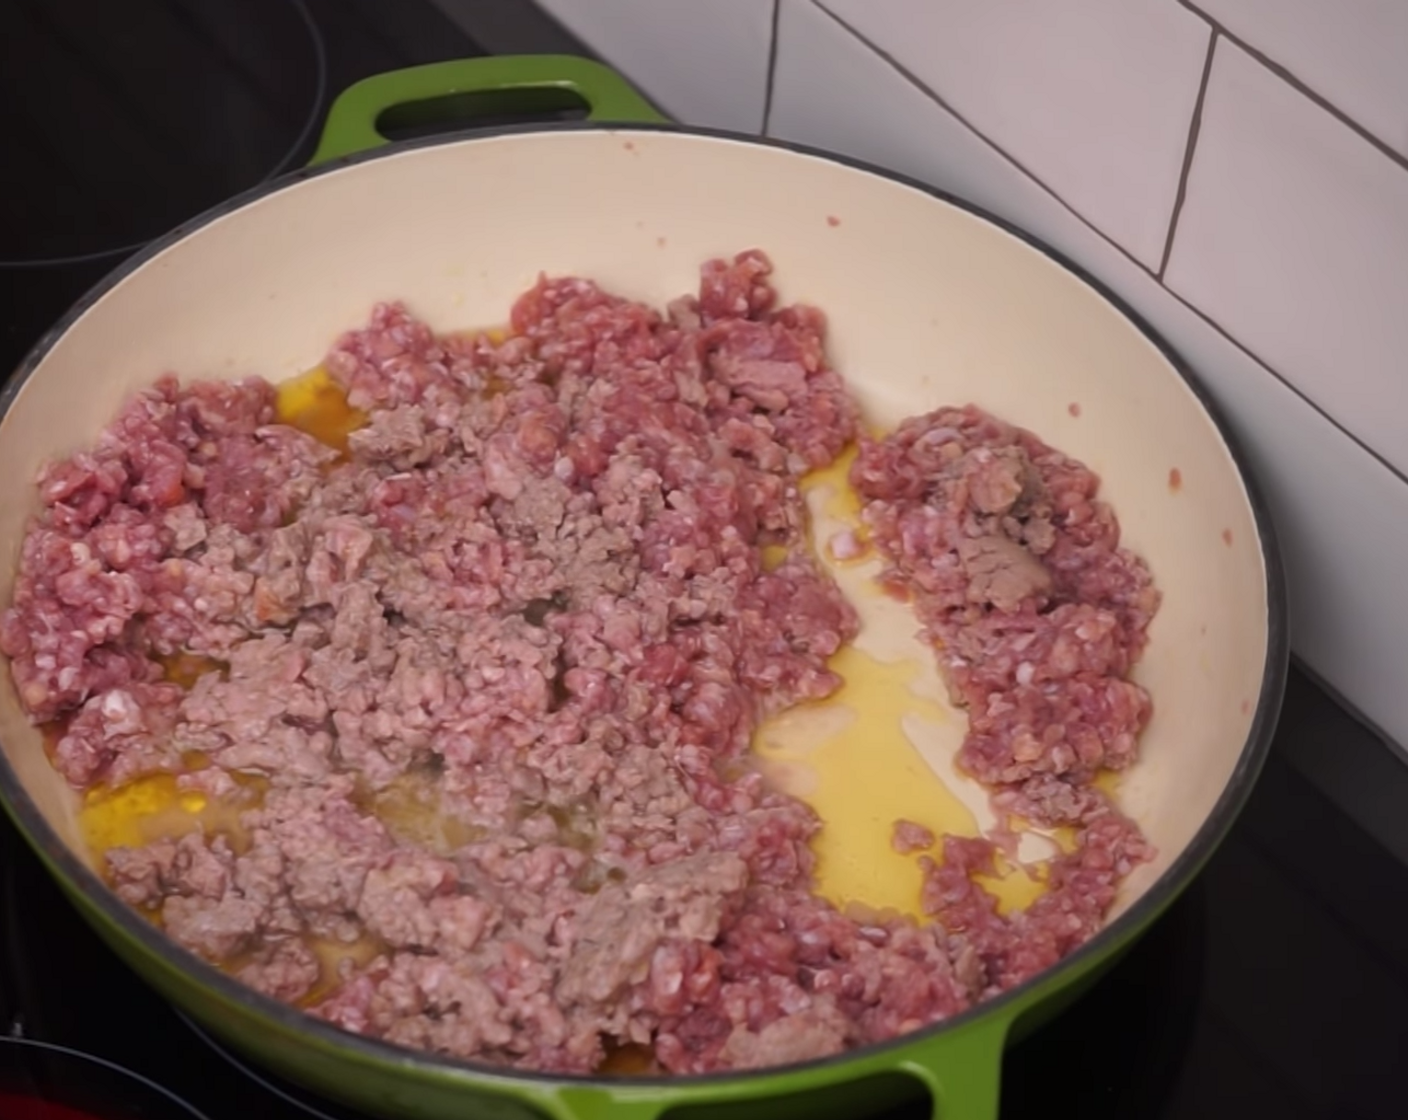 step 6 Add the Ground Pork (9 oz) and Ground Veal (9 oz) mince into the pan and let it start to brown while you break it down and spread it out into smaller pieces using a wooden spoon